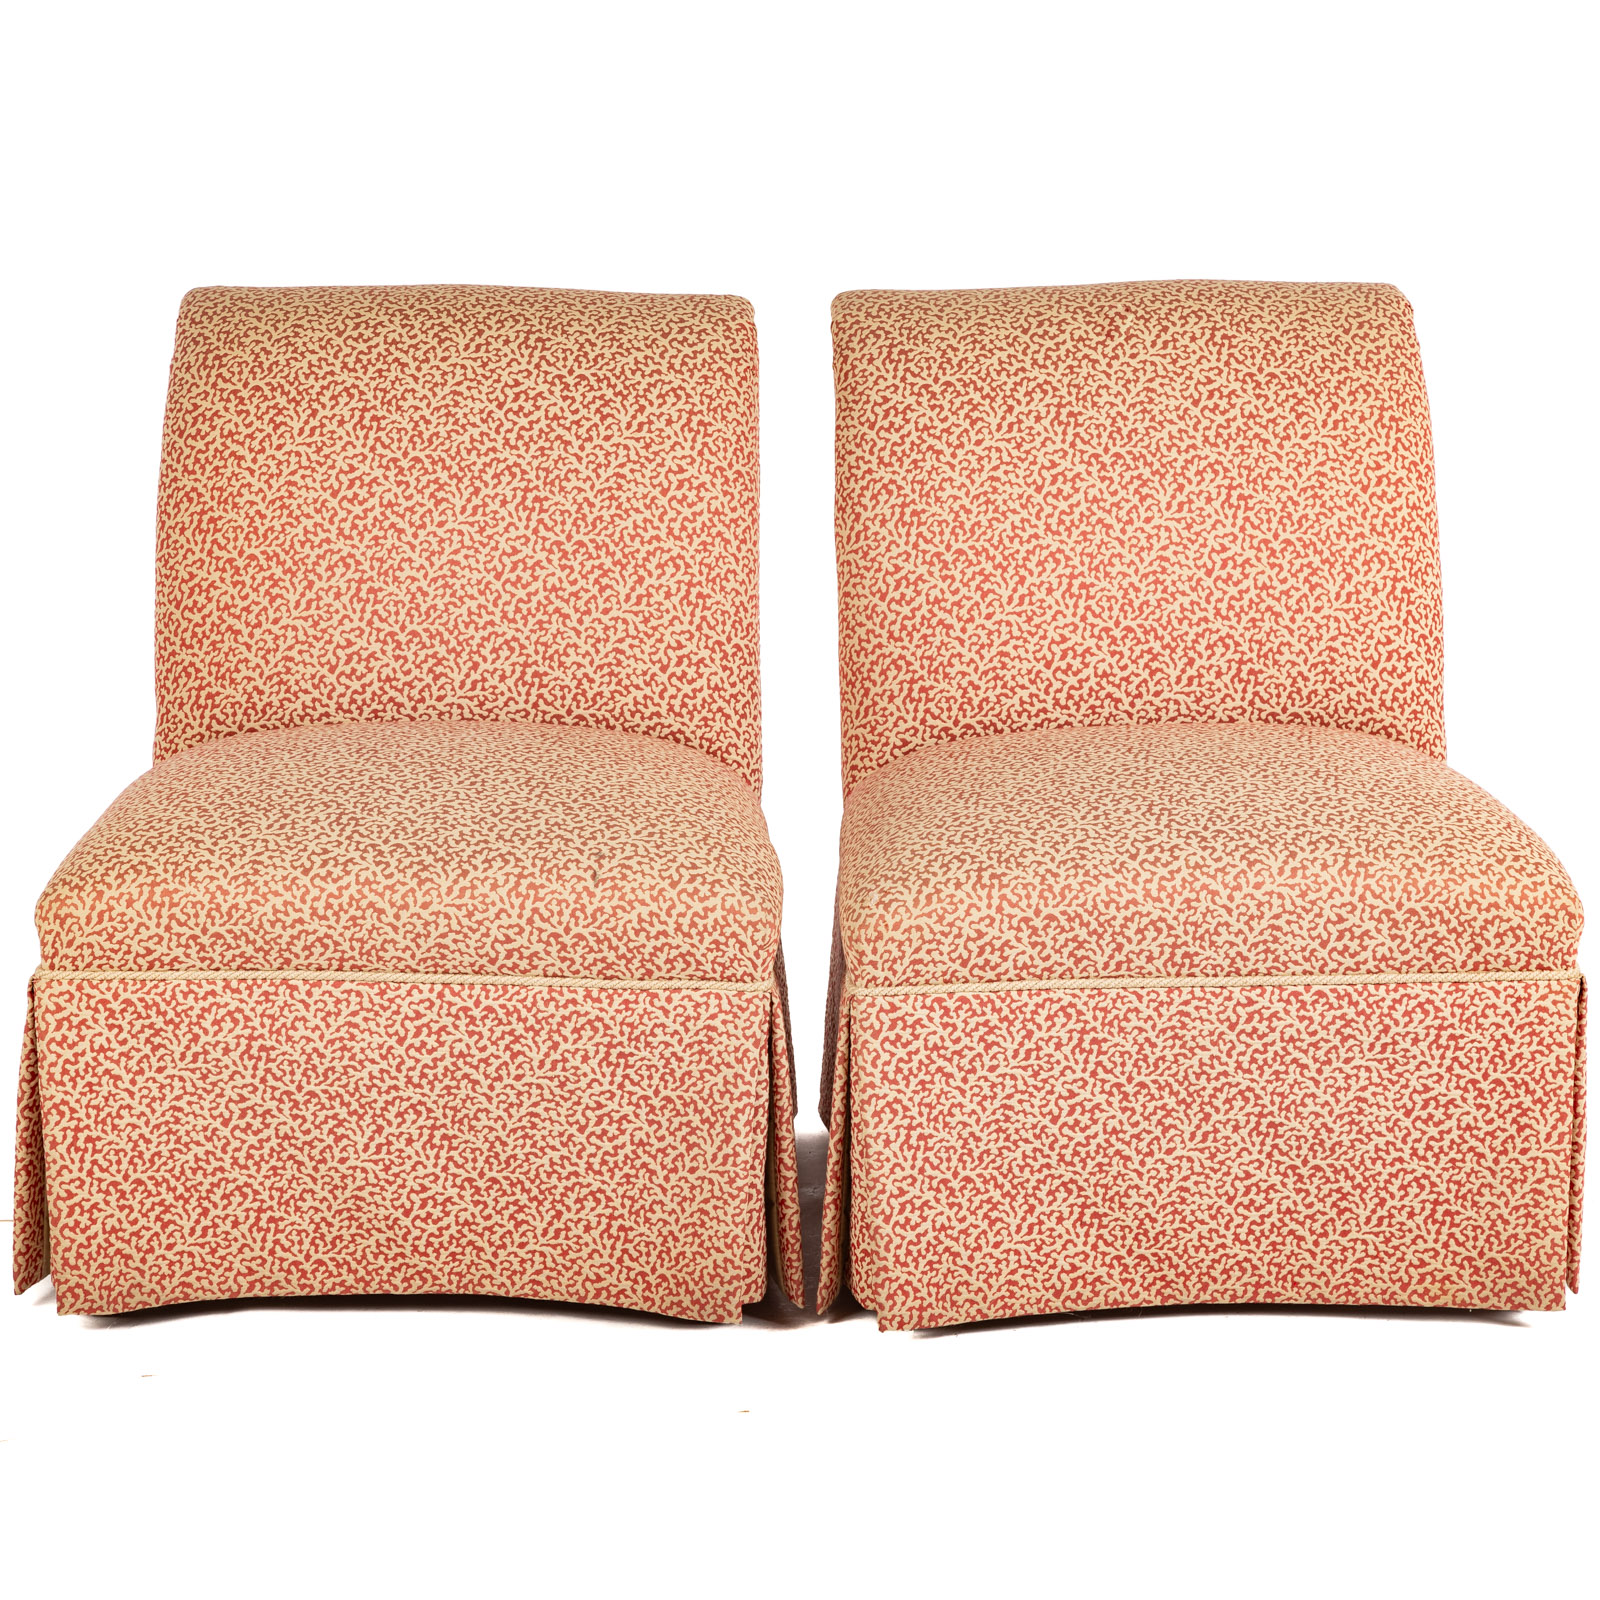 A PAIR OF ARMLESS UPHOLSTERED CHAIRS 3b2a07